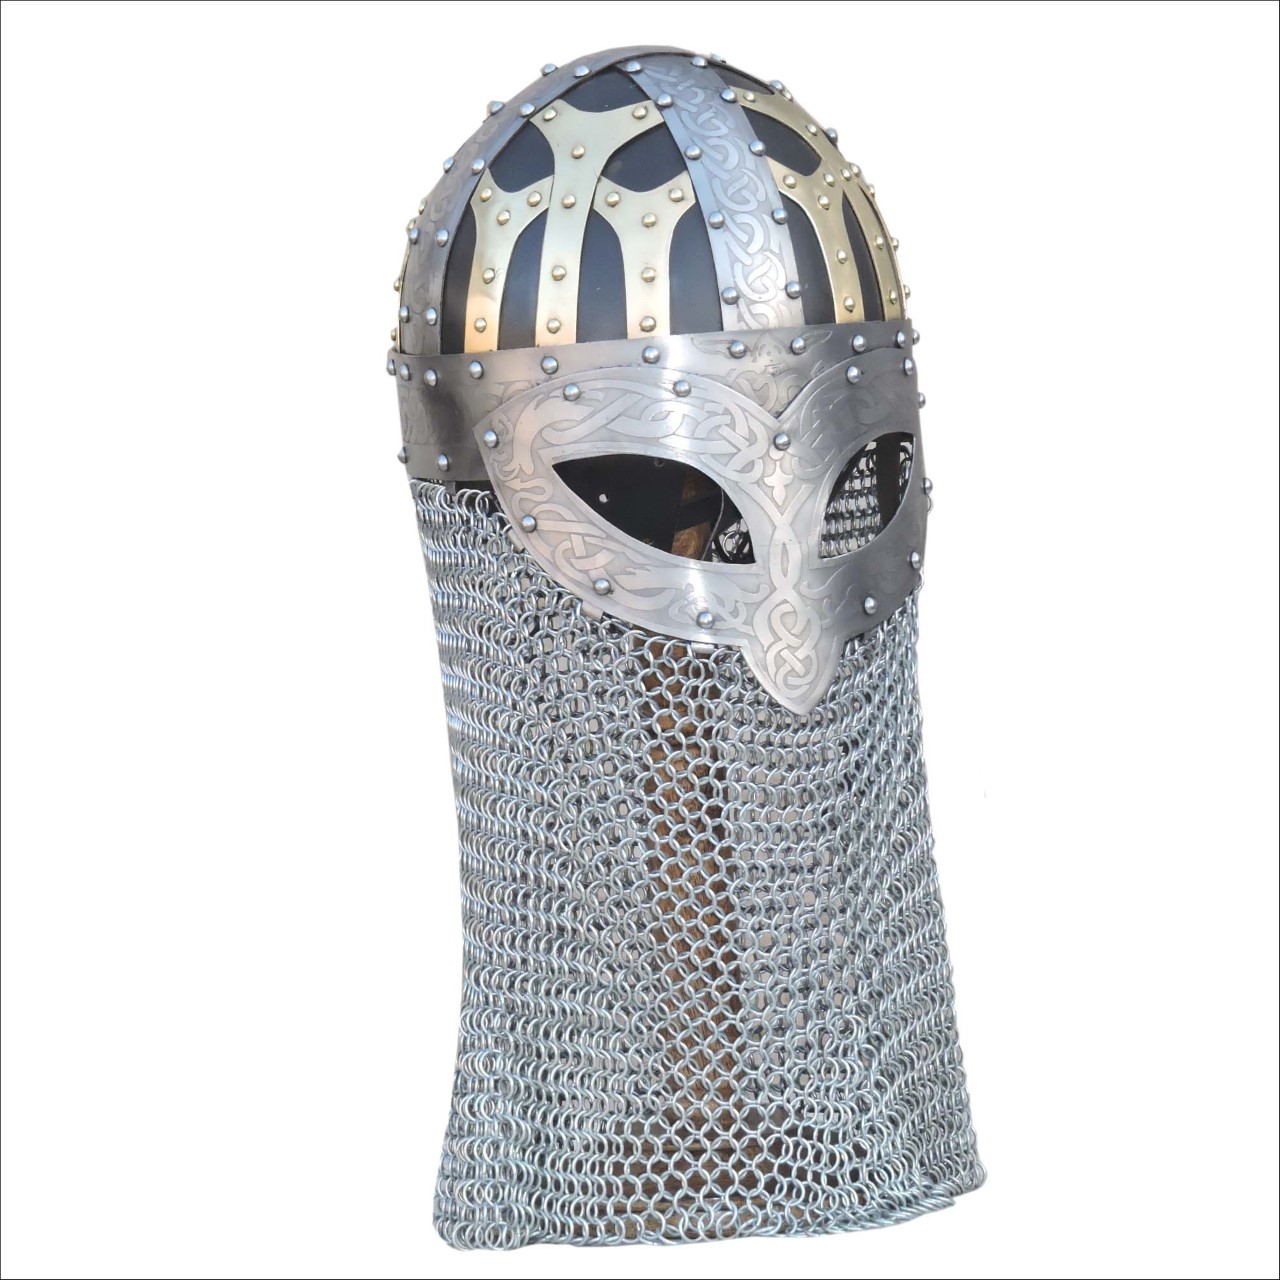 Highly Detailed Norse Warrior Helmet with Aventail